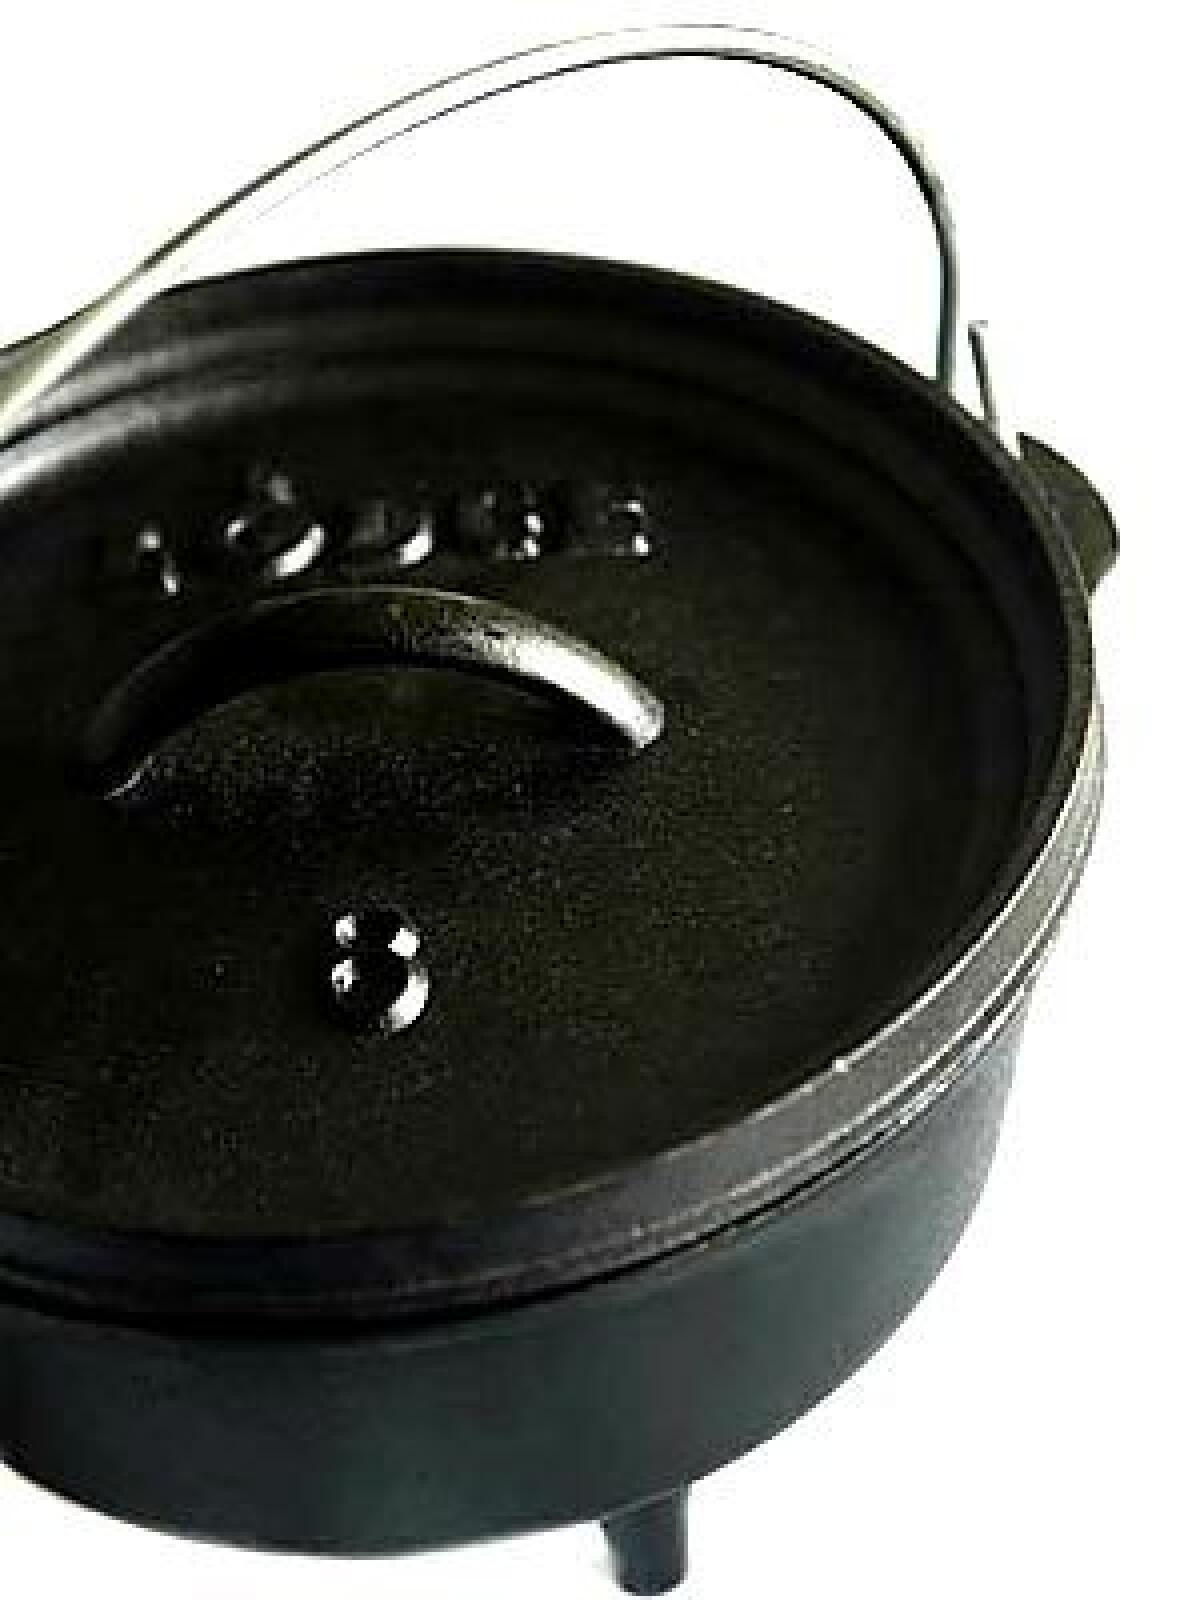 CAMP COOKING: The camp-style Dutch oven is remarkable at replicating the functions of a modern in-home oven.